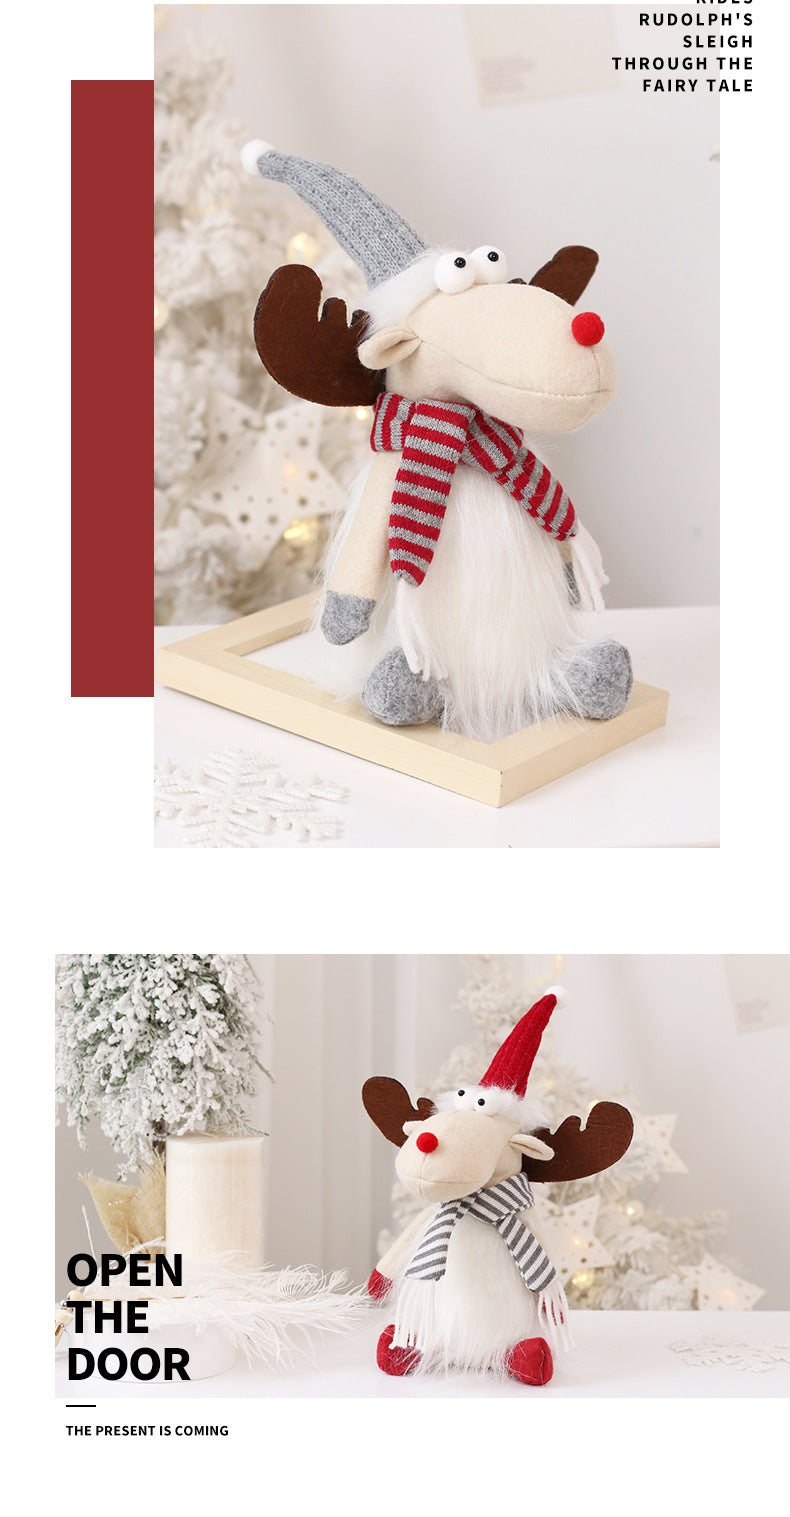 Christmas deco cute elk gnomes with scarf